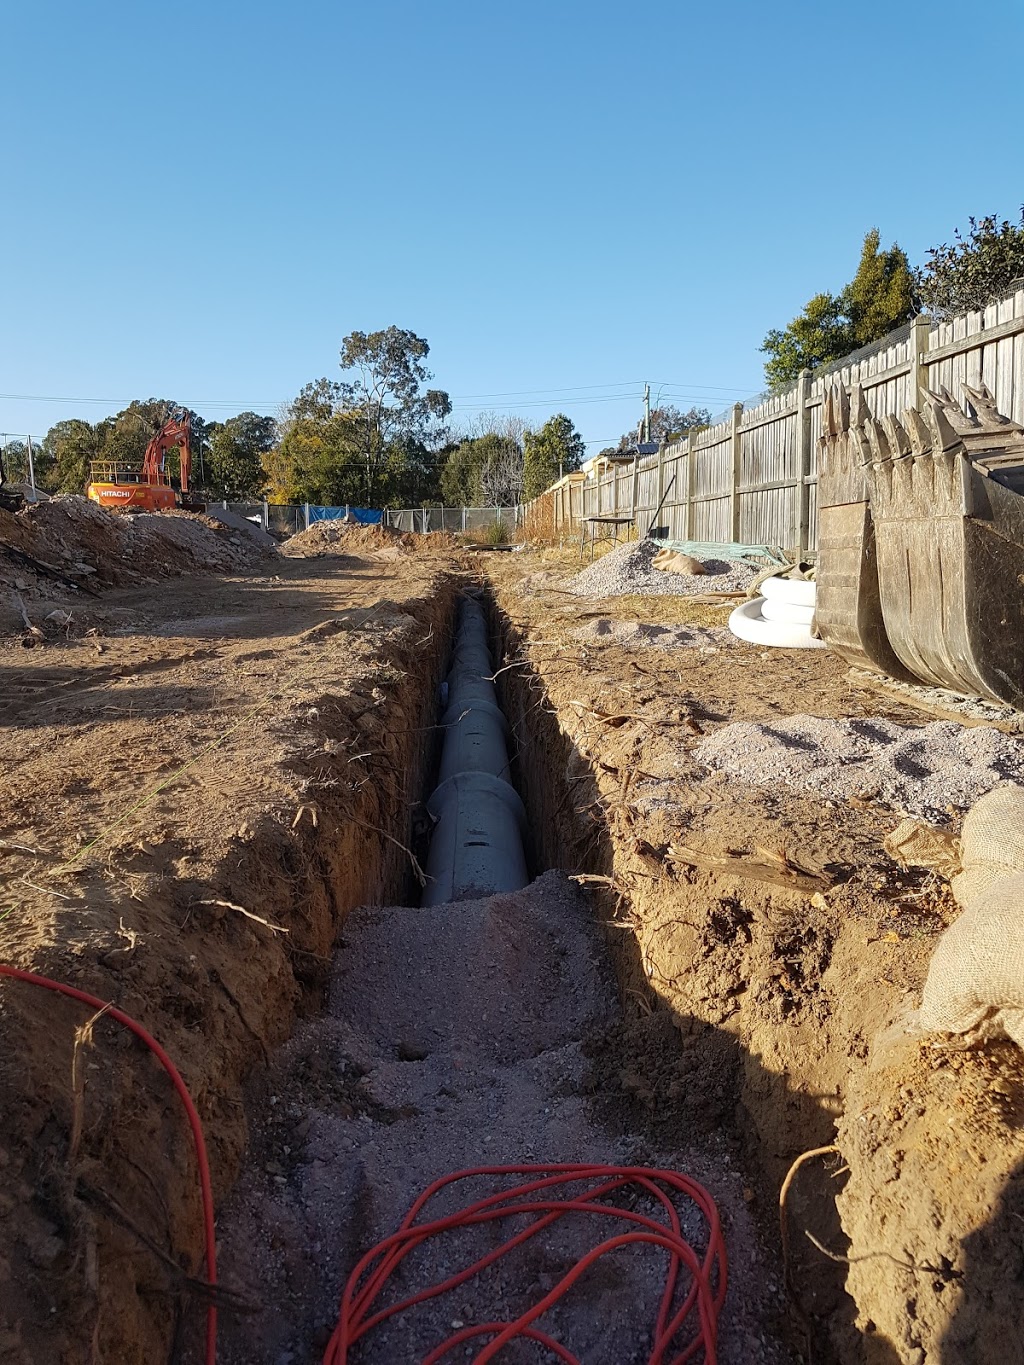 North West Plumbing & Drainage Pty Ltd | plumber | 1 Brushwood Dr, Rouse Hill NSW 2155, Australia | 0451669290 OR +61 451 669 290